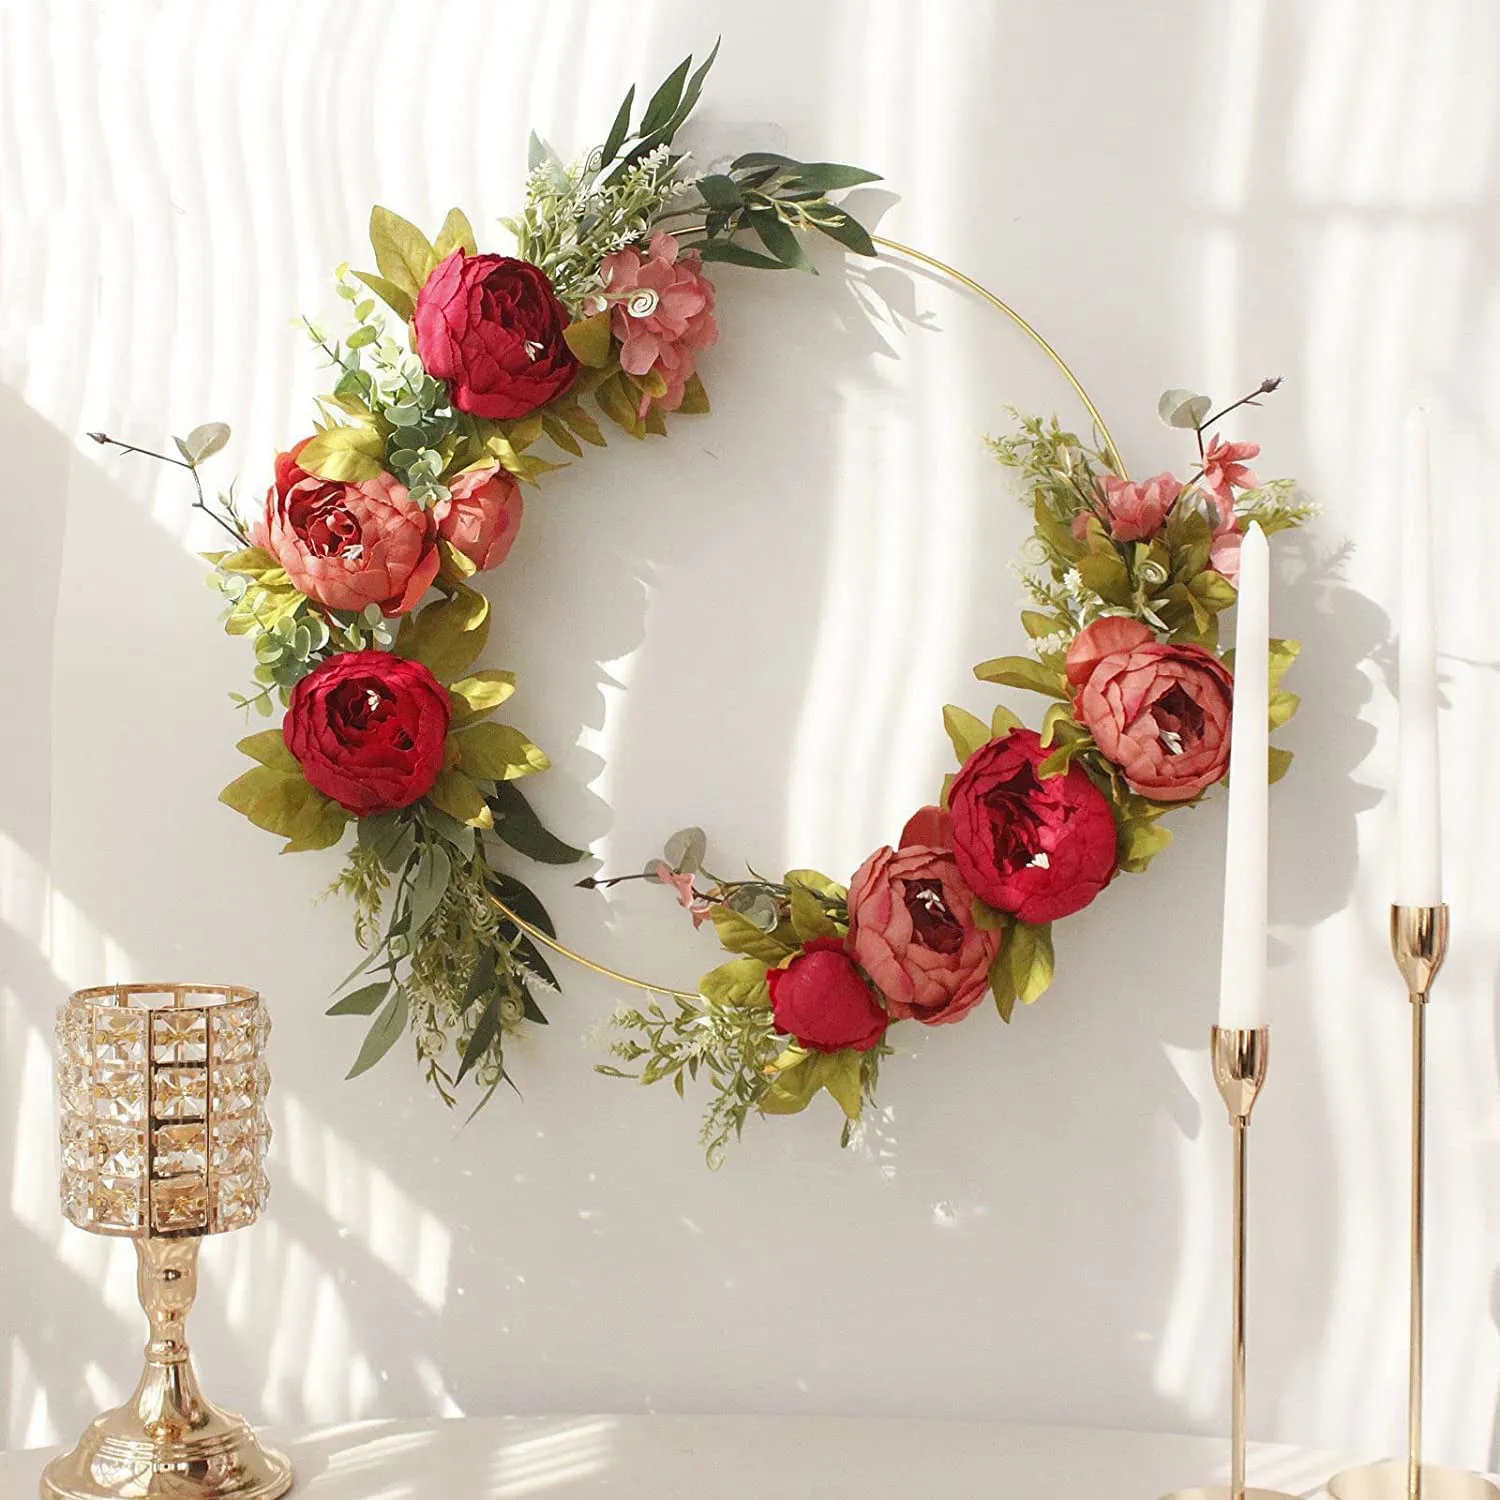 6 PCS 12 Inch Large Metal Floral Hoop Centerpiece for Table, Gold Wreath Ring with 6 PCS Wood Holder Stands, Hoop Rings images - 6